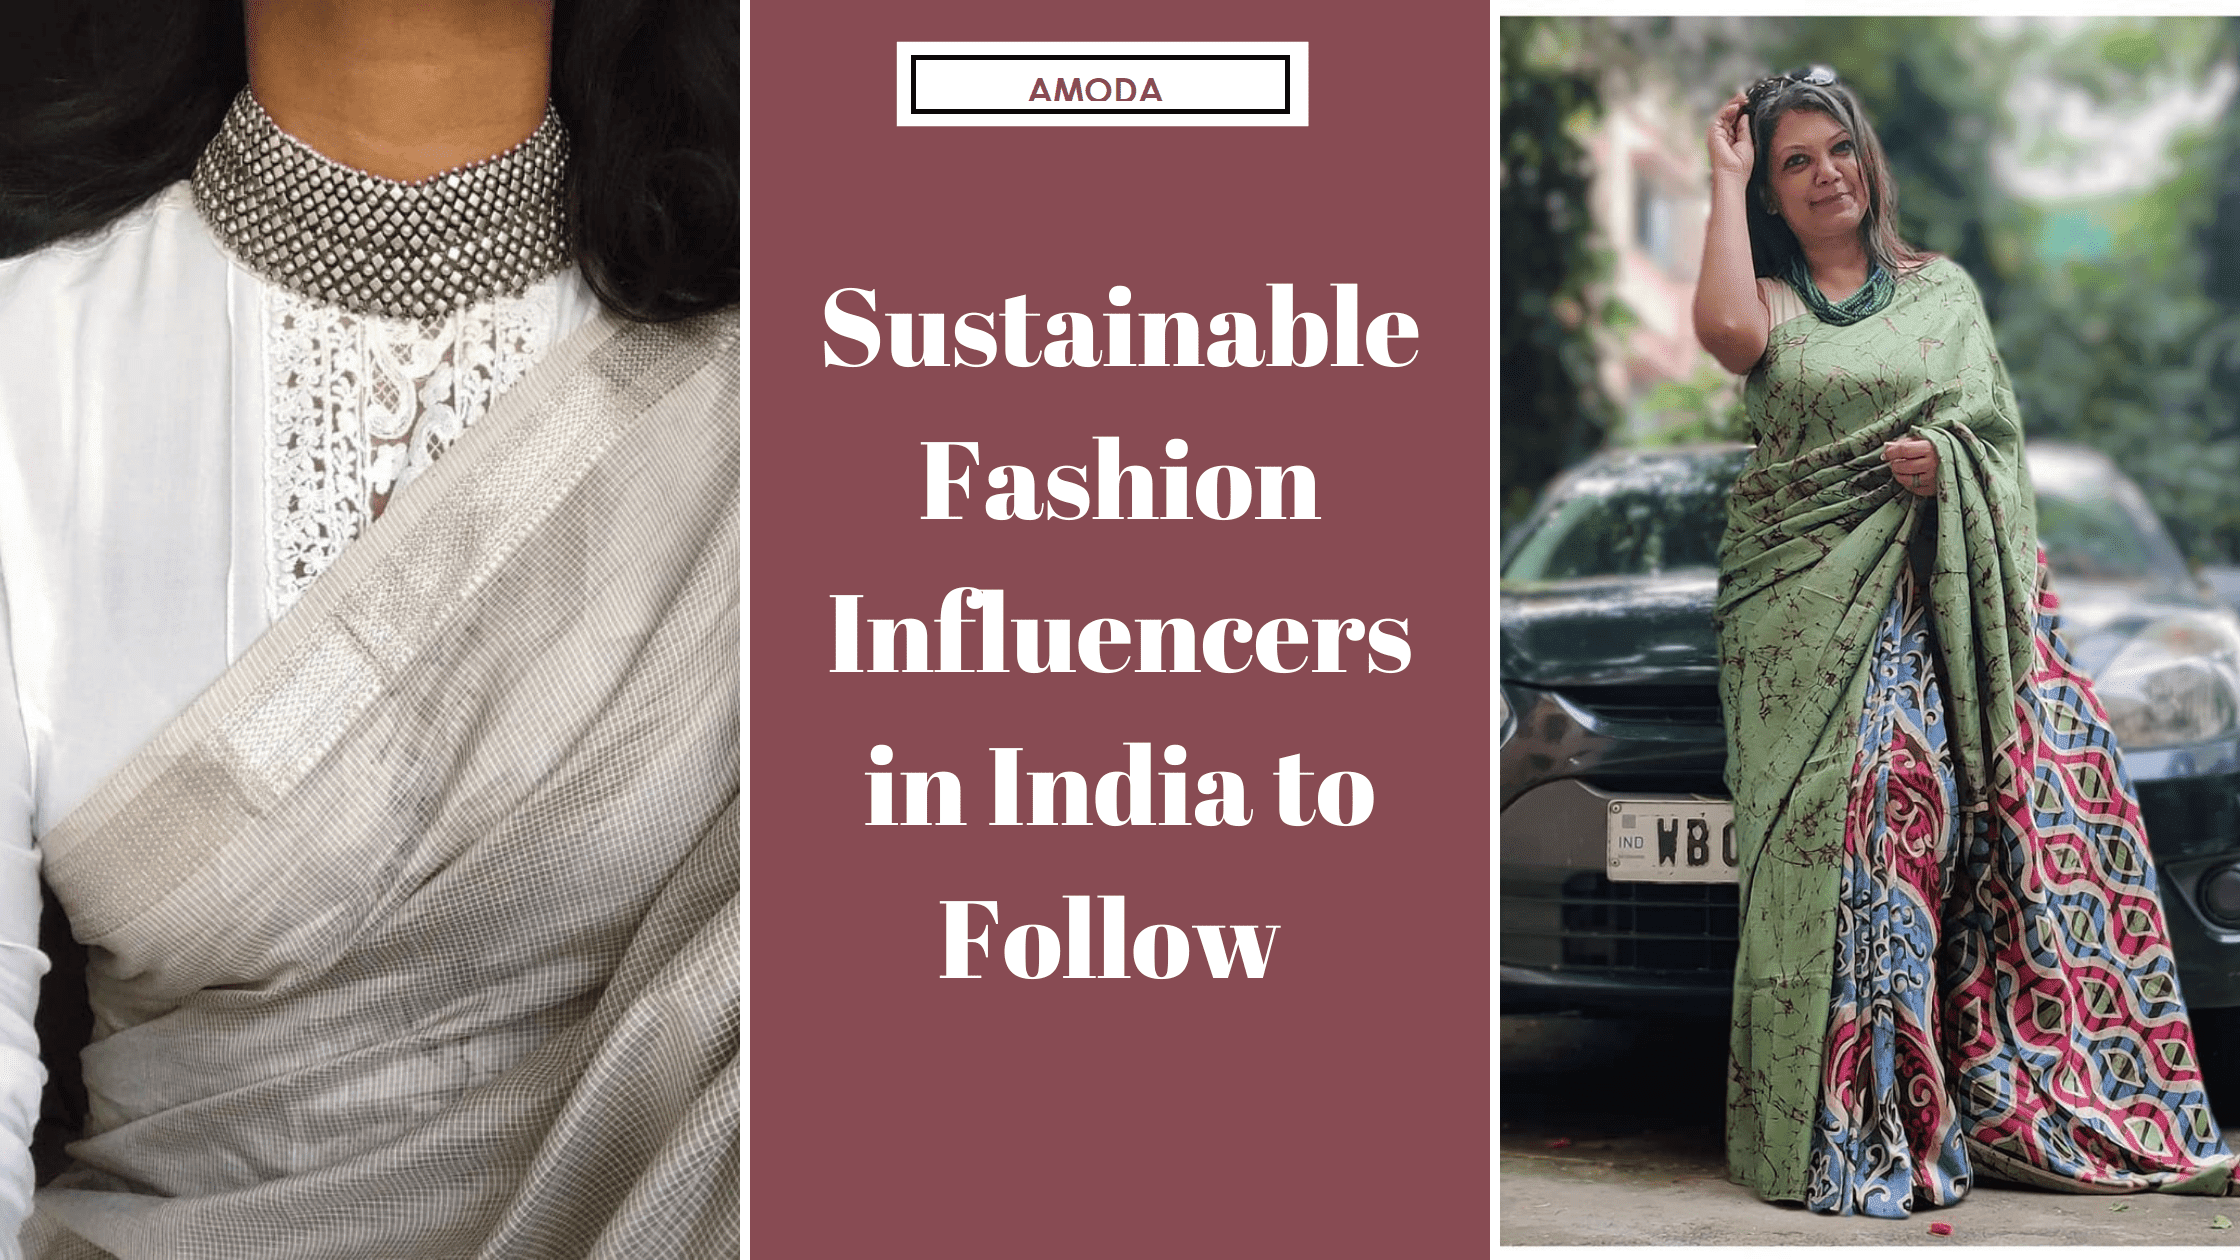 How sustainable fashion influencers are spreading awareness?